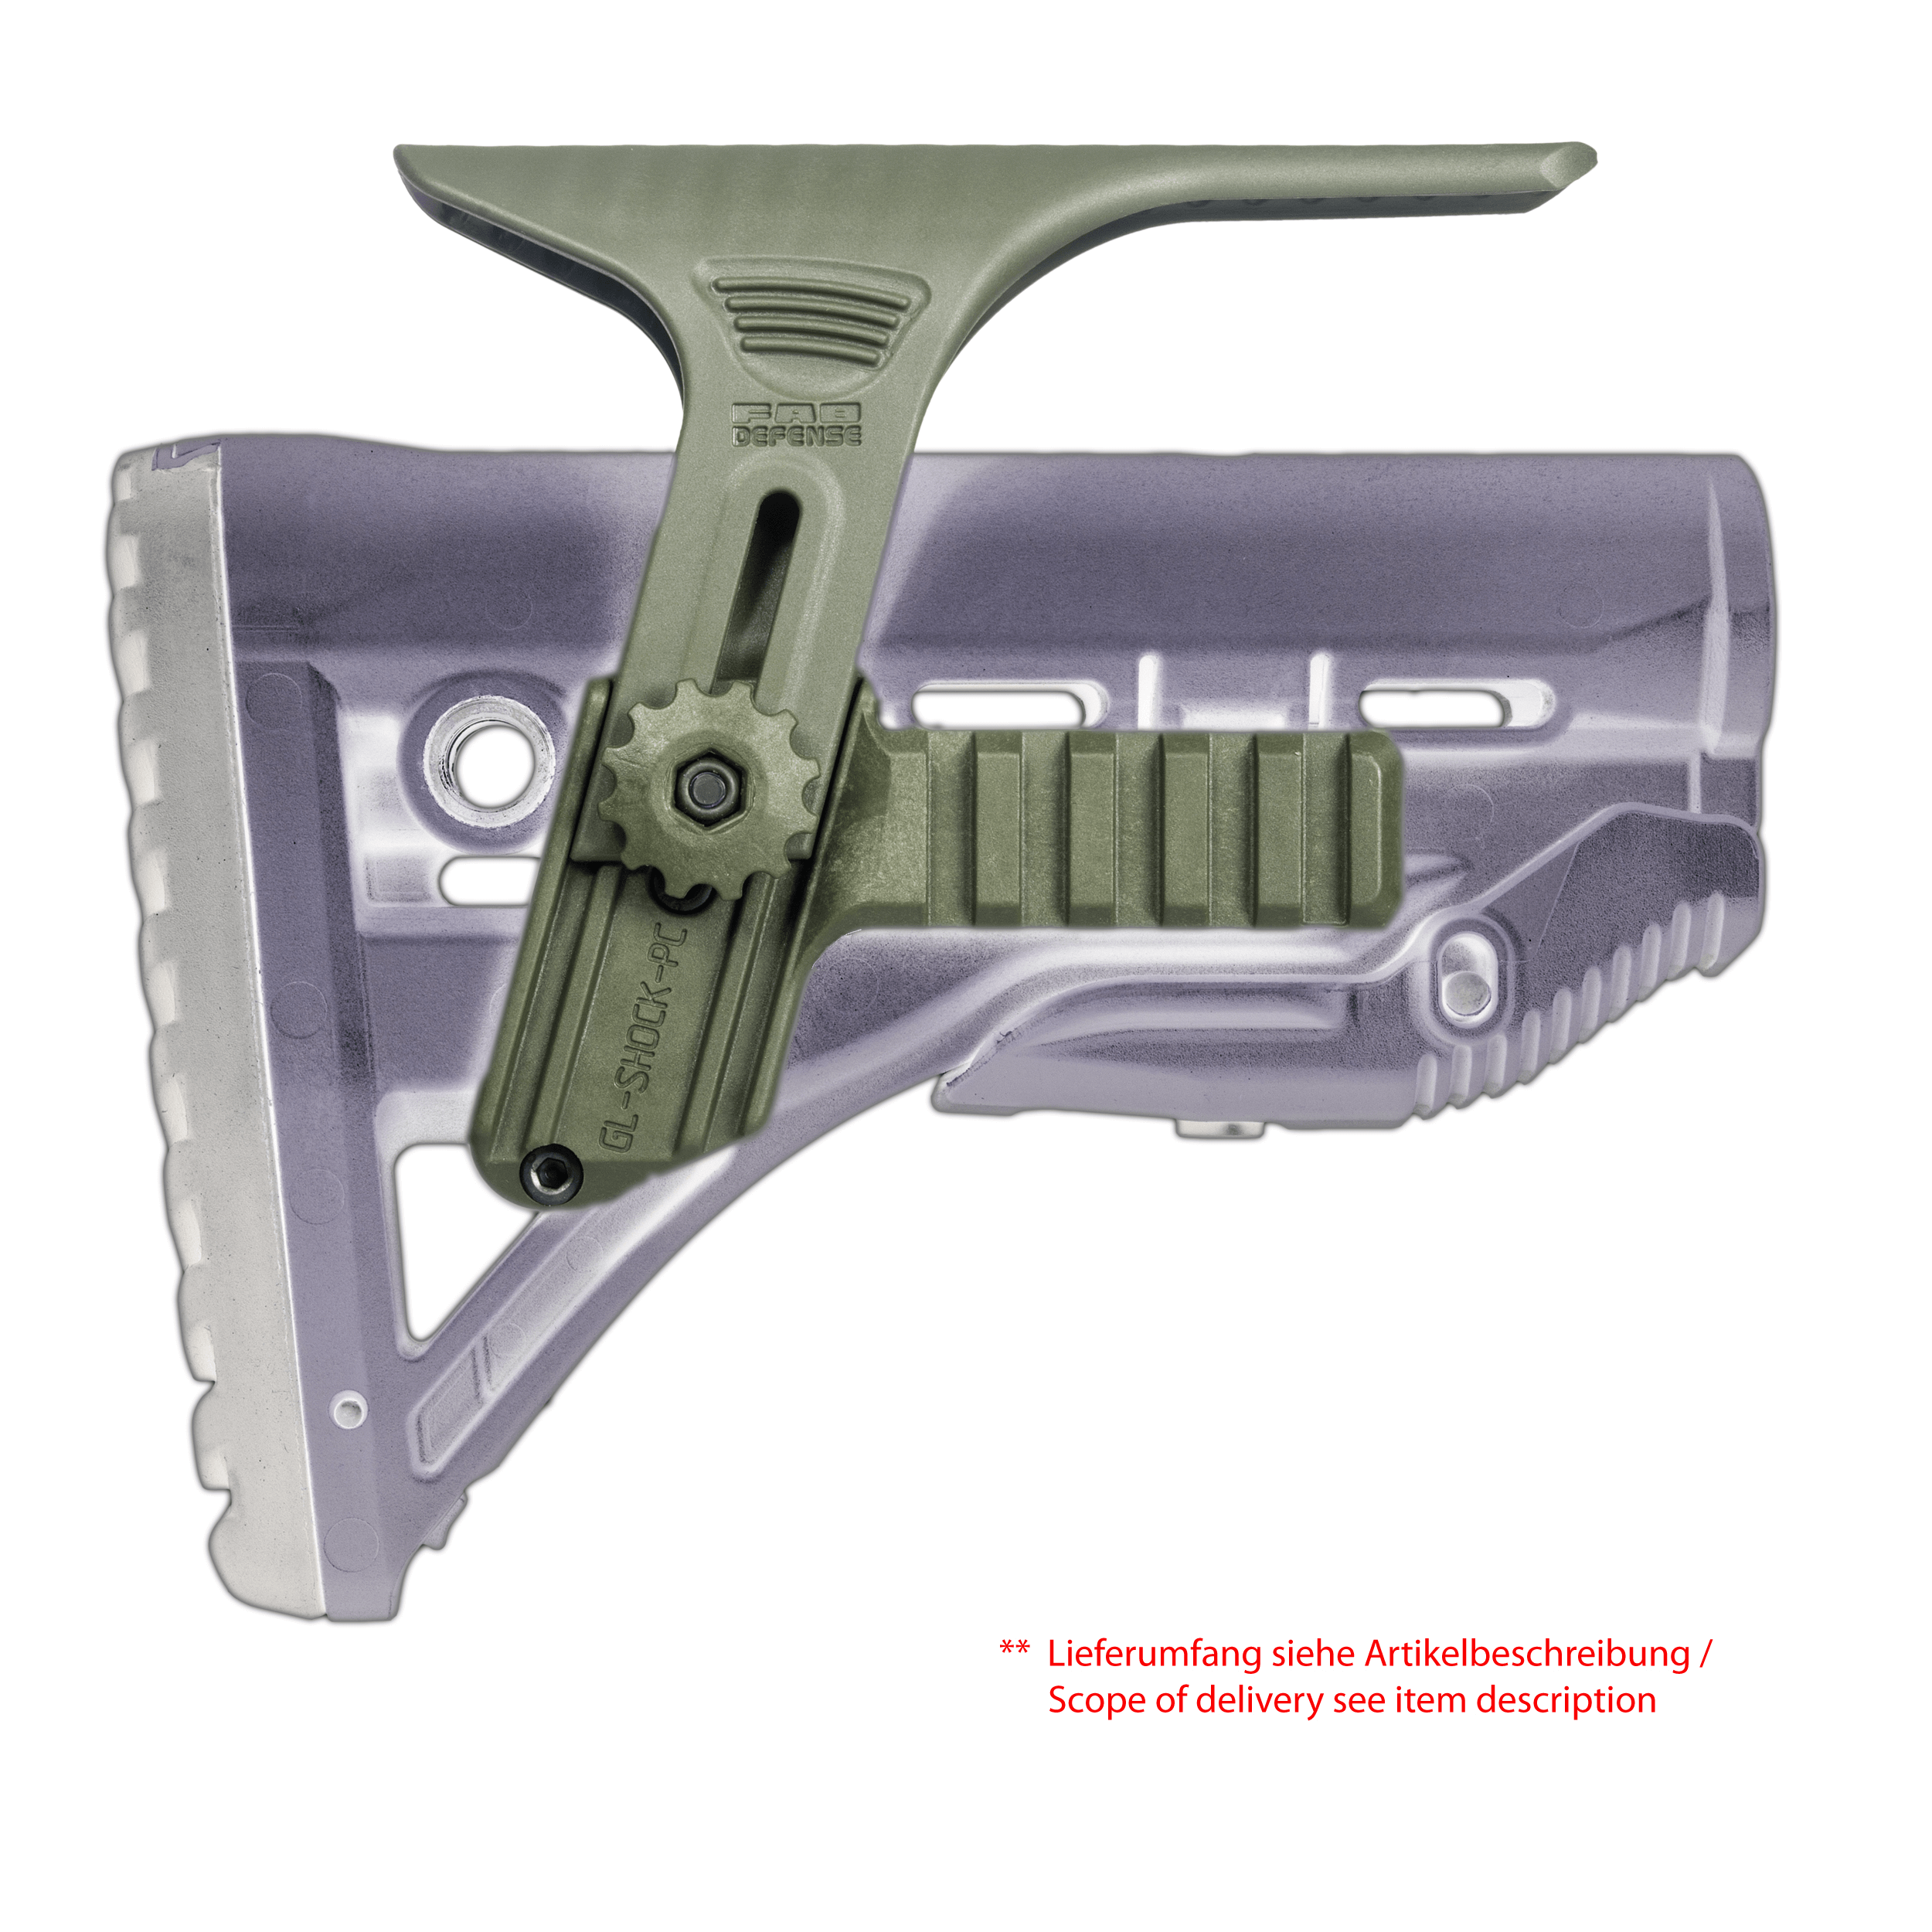 GSPCP Cheek Rest Kit With Dual Picatinny Rails For GL-SHOCK CHEEK REST KIT WITH DUAL PICATINNY RAILS FOR GL-SHOCK